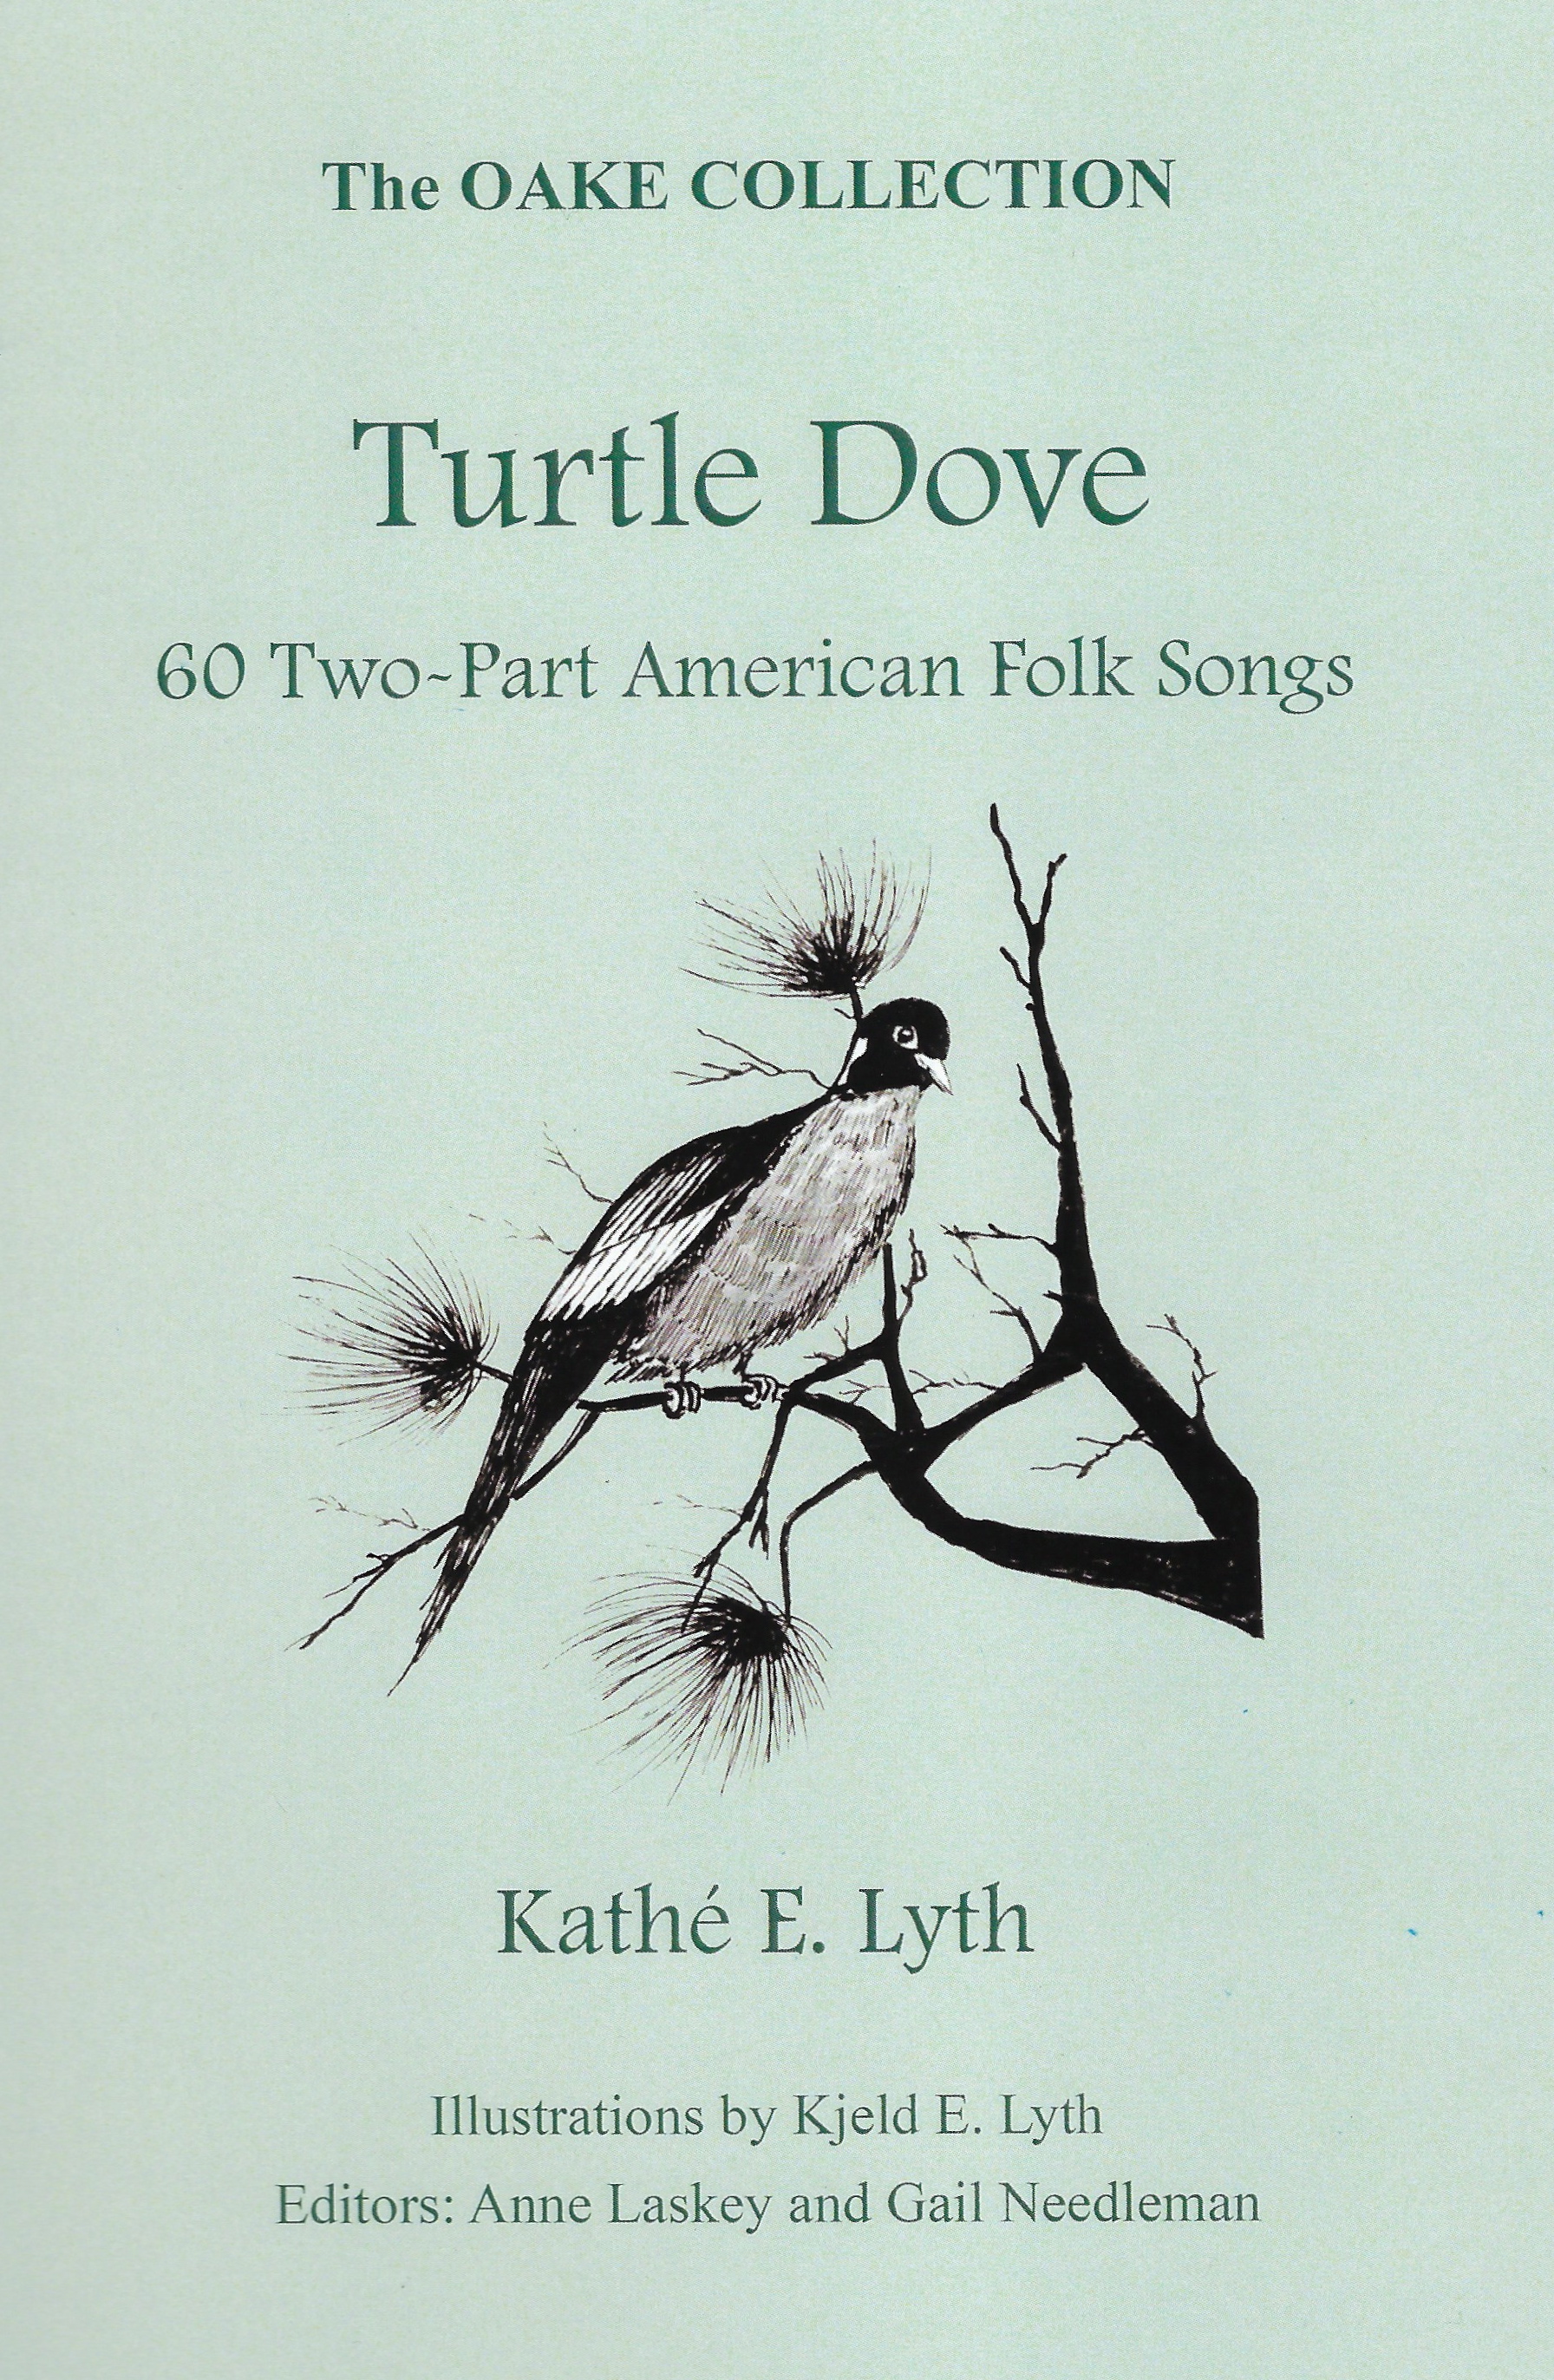 Turtle Dove: 60 Two-Part American Folk Songs<br>Arranged by Kath E. Lyth